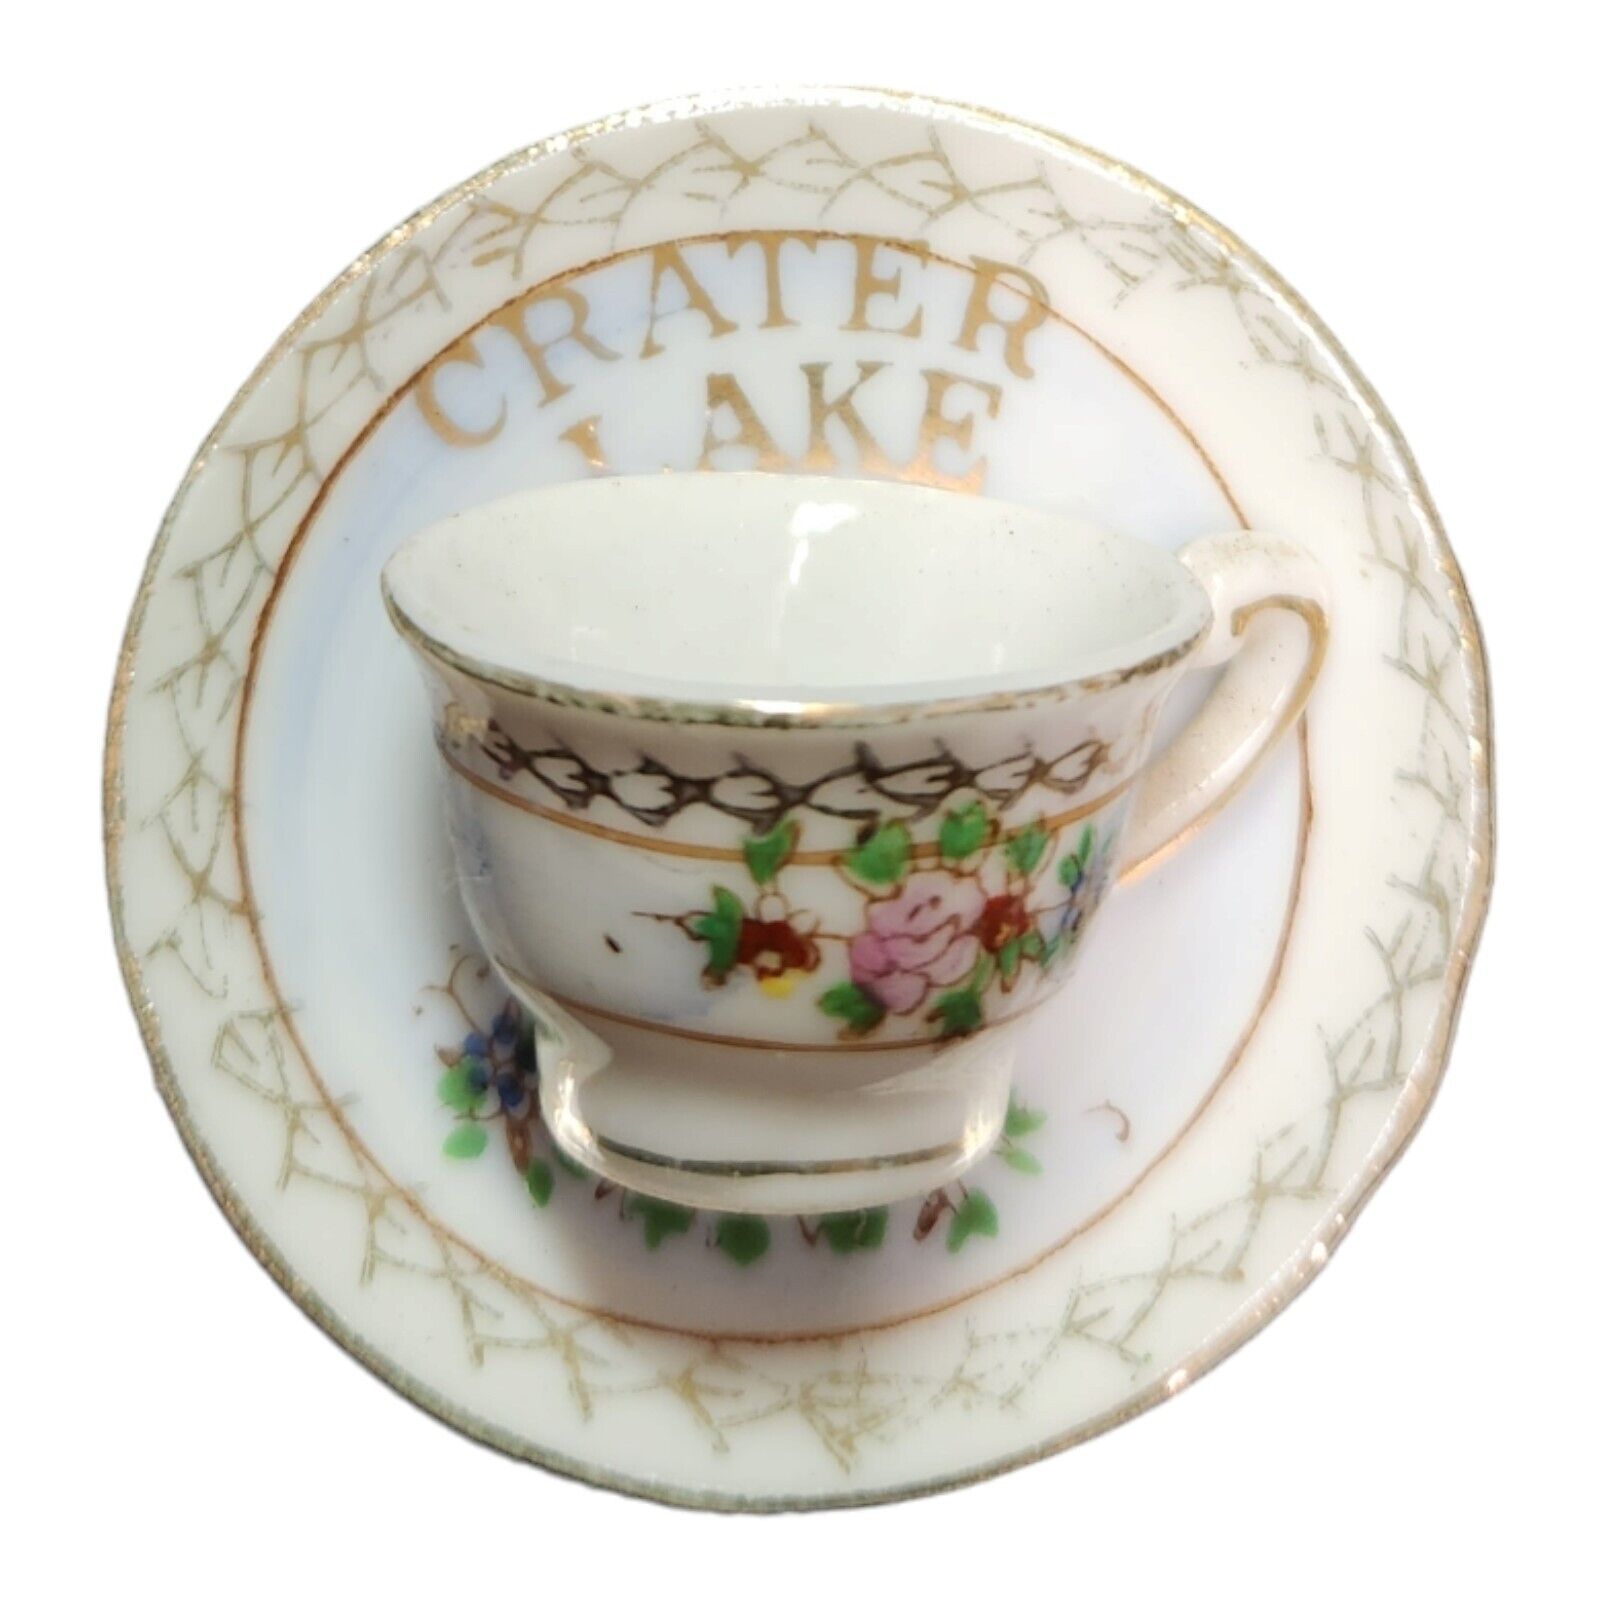 Vintage Crater Lake Souvenir Miniature Cup And Saucer Japanese Victoria China